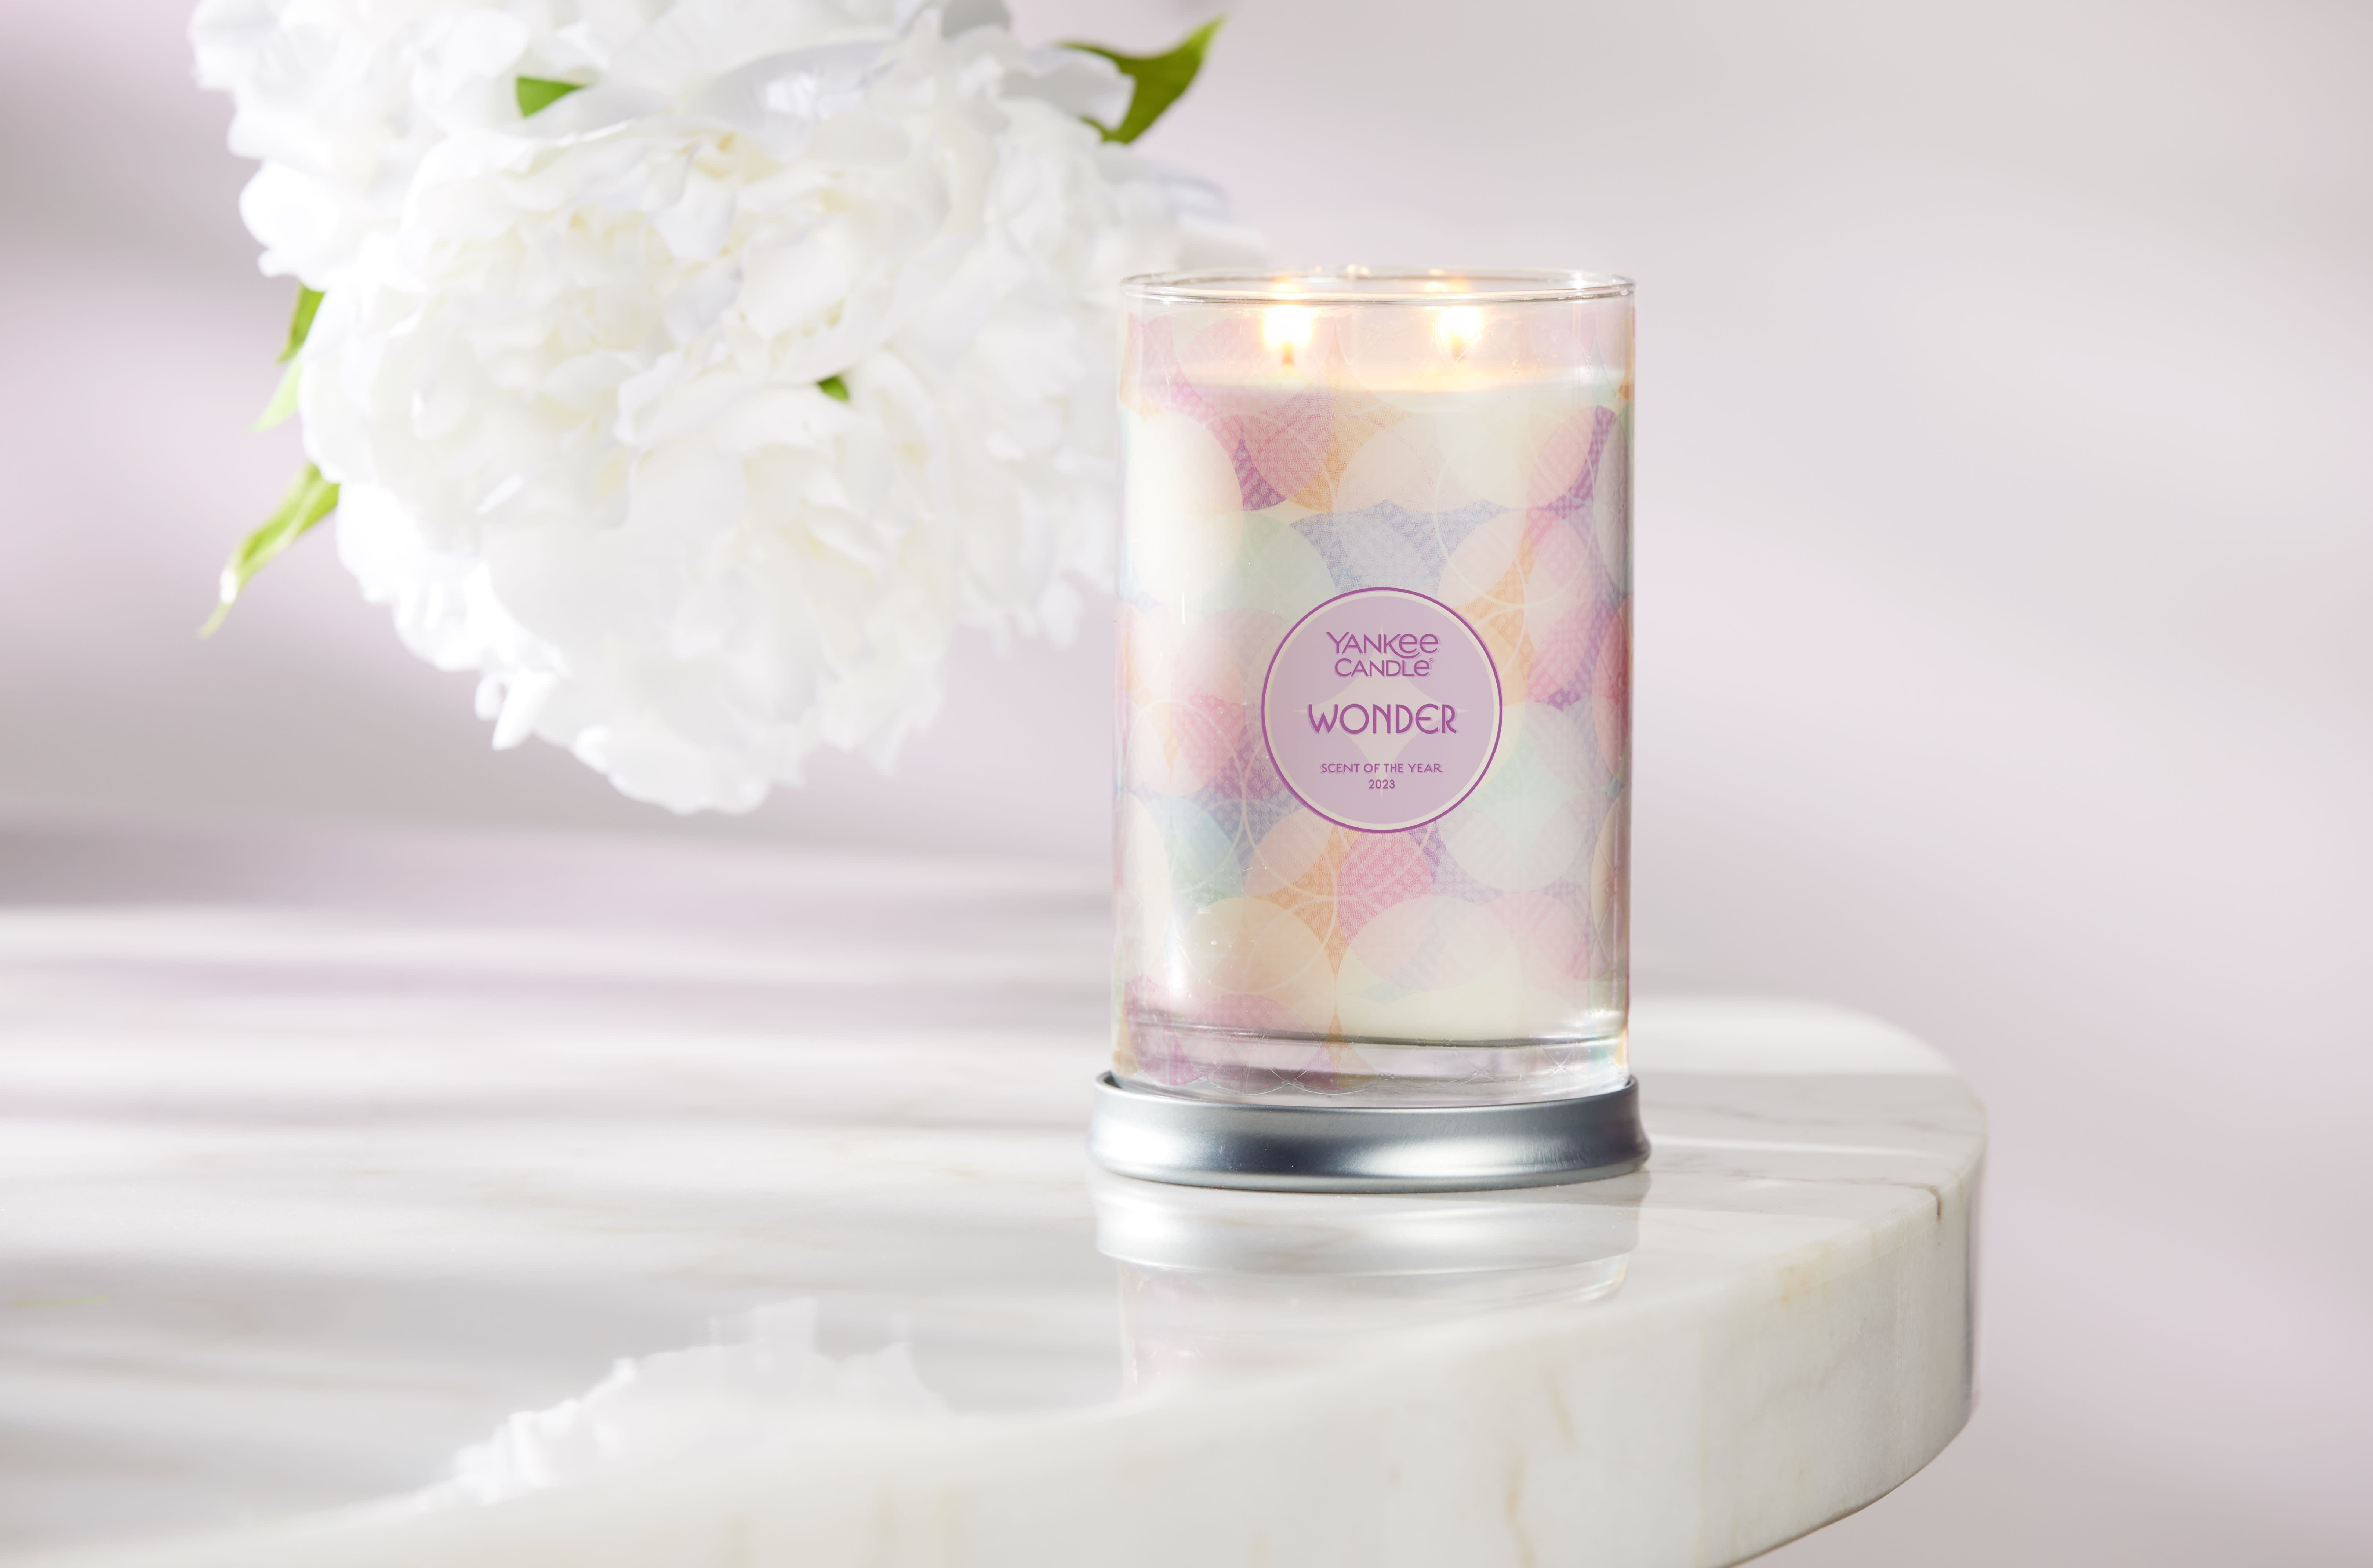 Yankee Candle Wax Melts Reviews - March 2023 